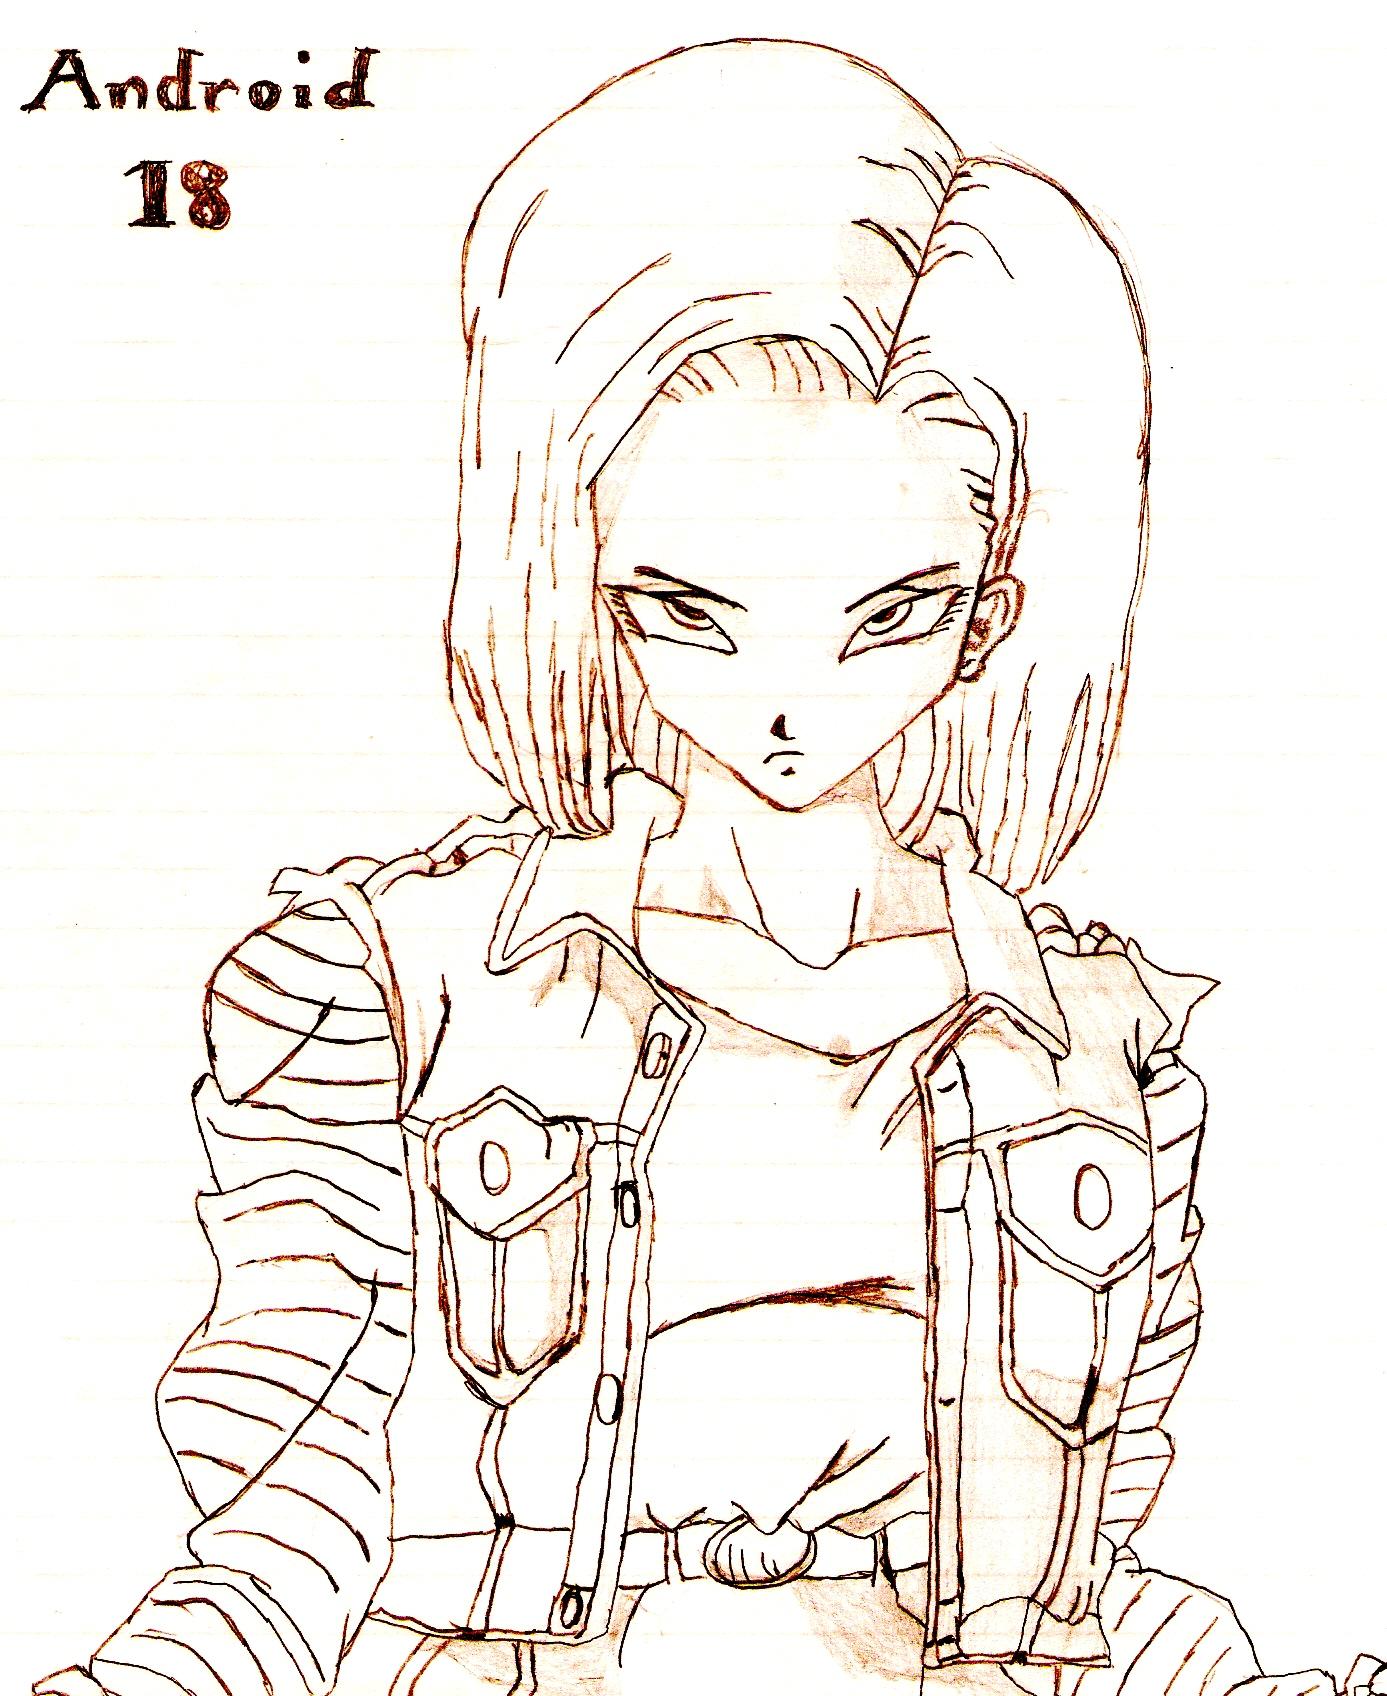 Android 18 by balong